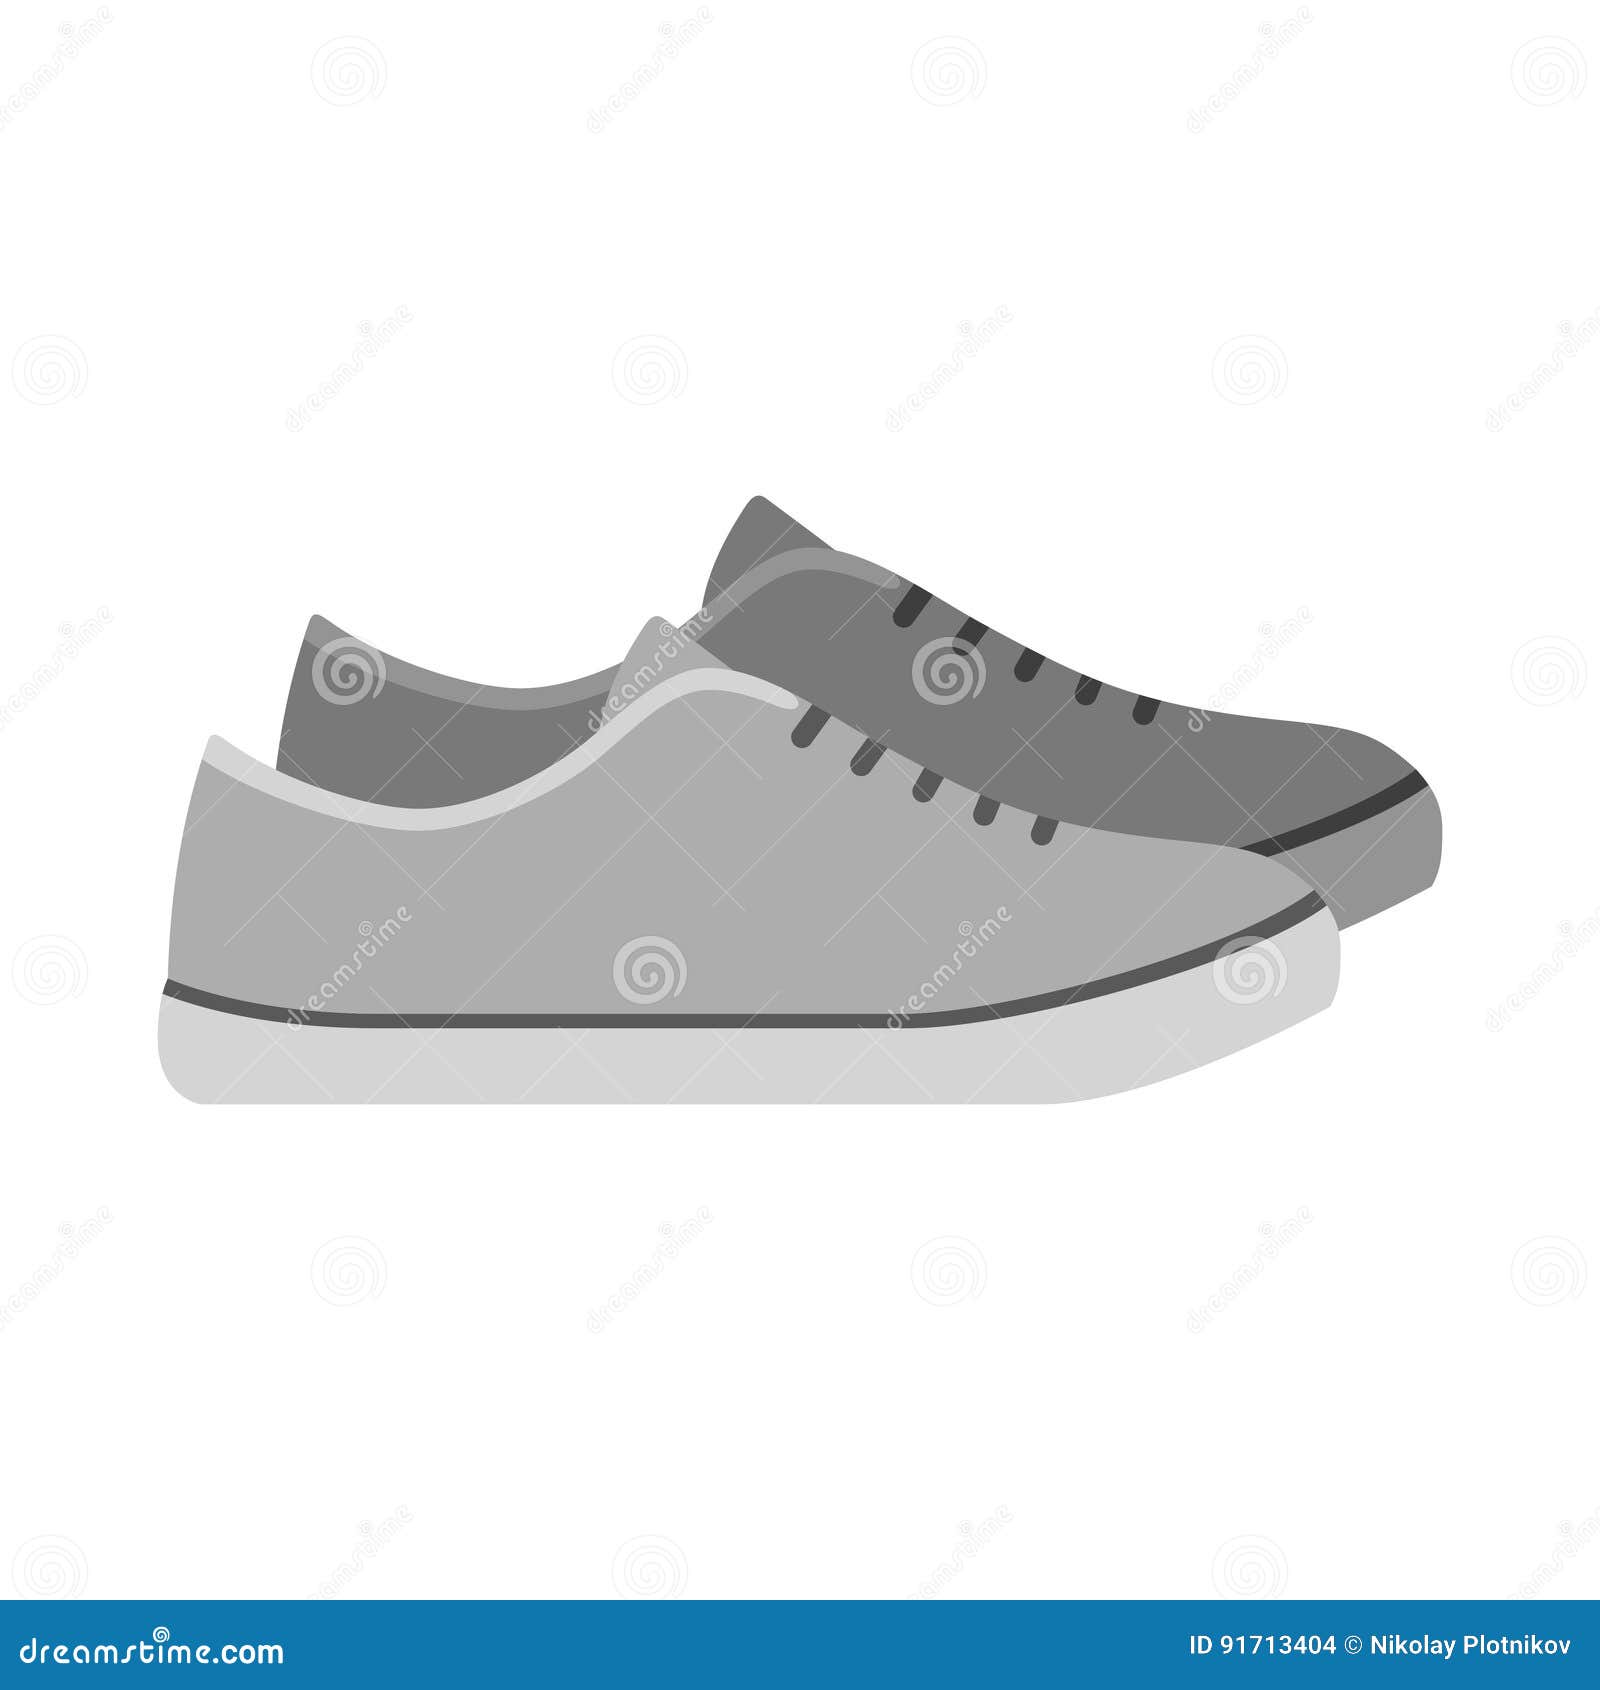 Sneakers, Loafers Shoes Isolated on White Background. Footwear for ...